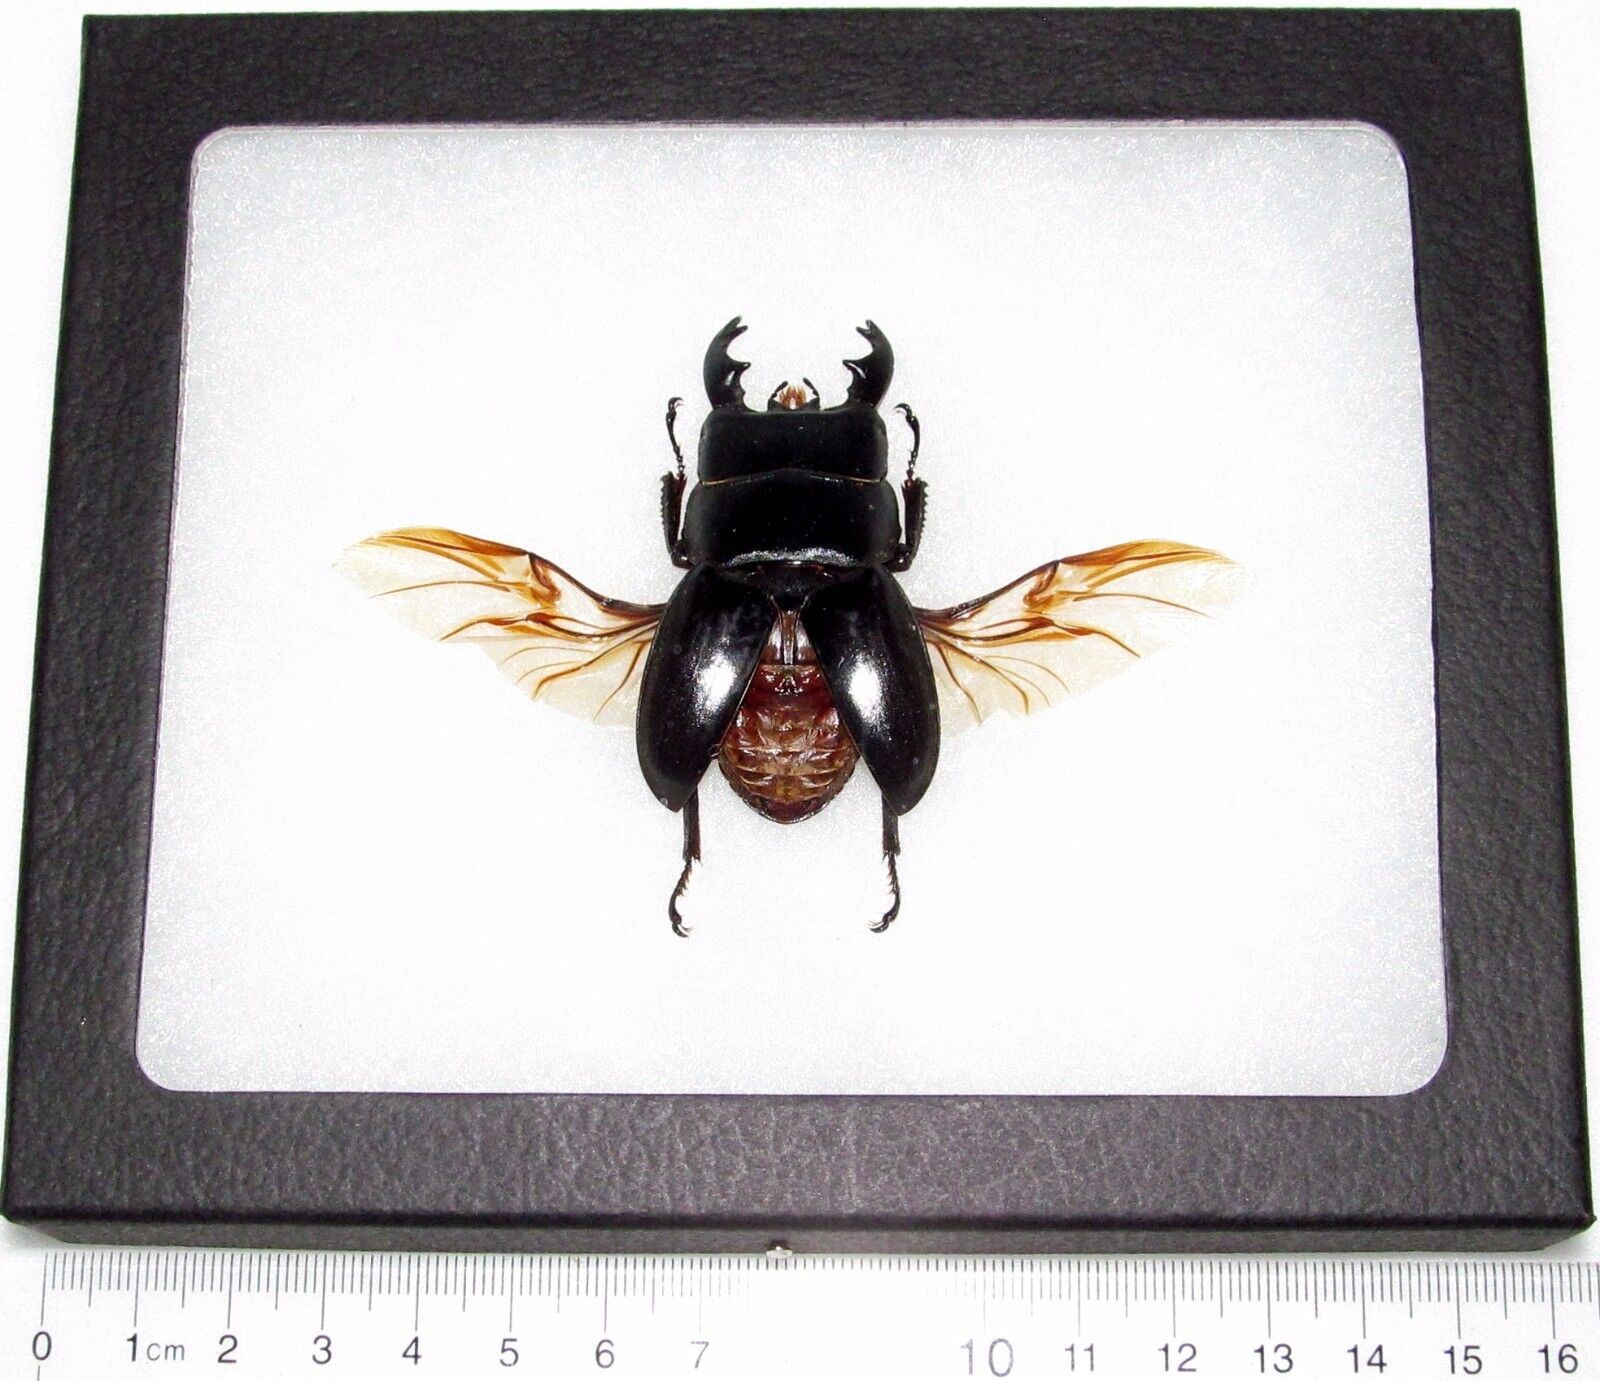 Dorcus wings spread REAL FRAMED BLACK STAG BEETLE MOUNTED